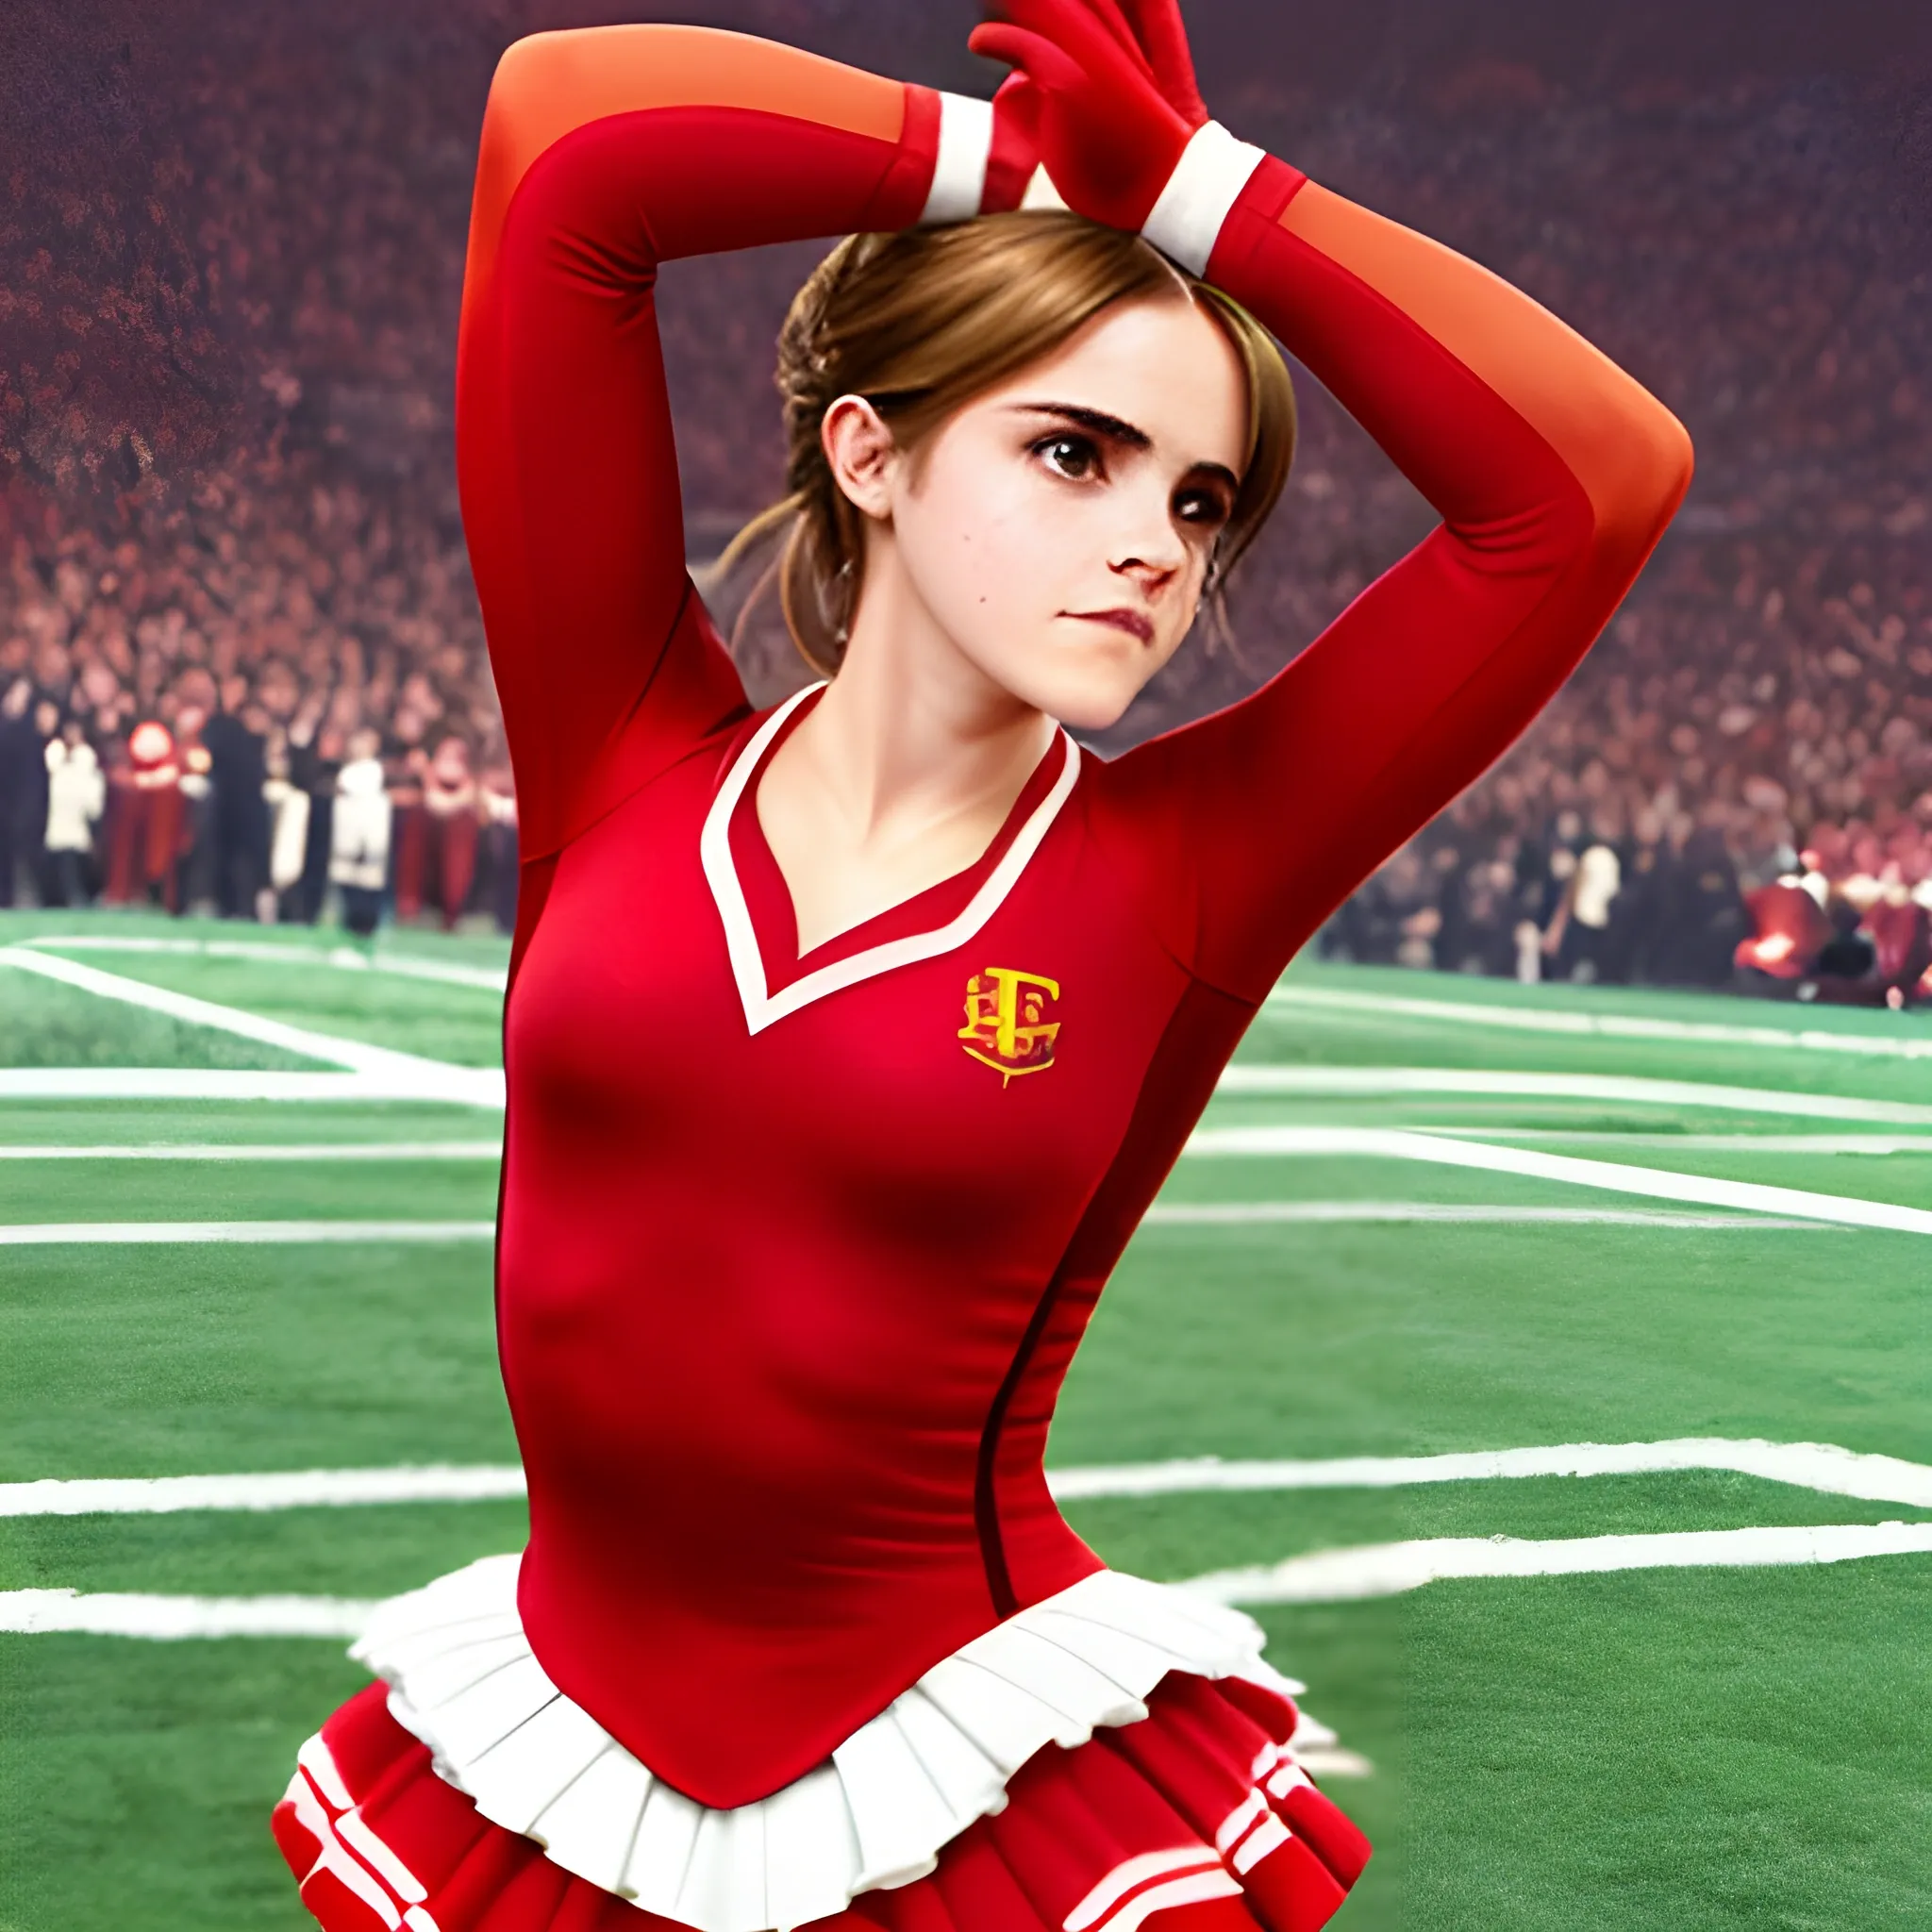 take a picture of the famous actress named emma watson dressed as a cheerleader in red color